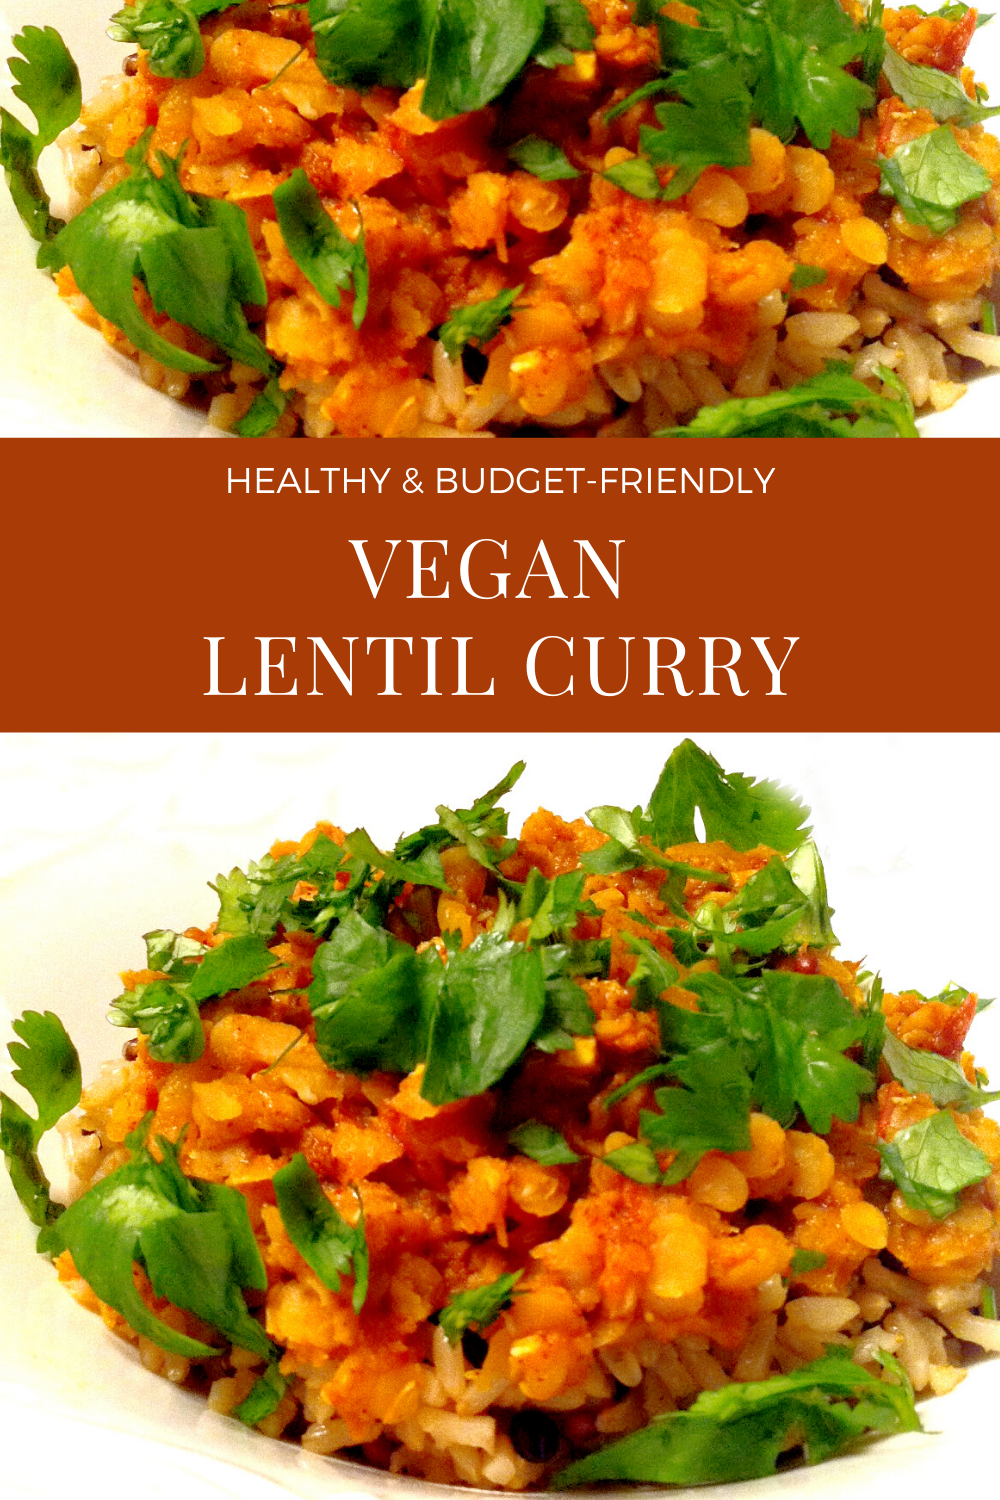 Vegan Lentil Curry - A hearty and healthy dinner ready to serve in under 30 minutes! via @thiswifecooks